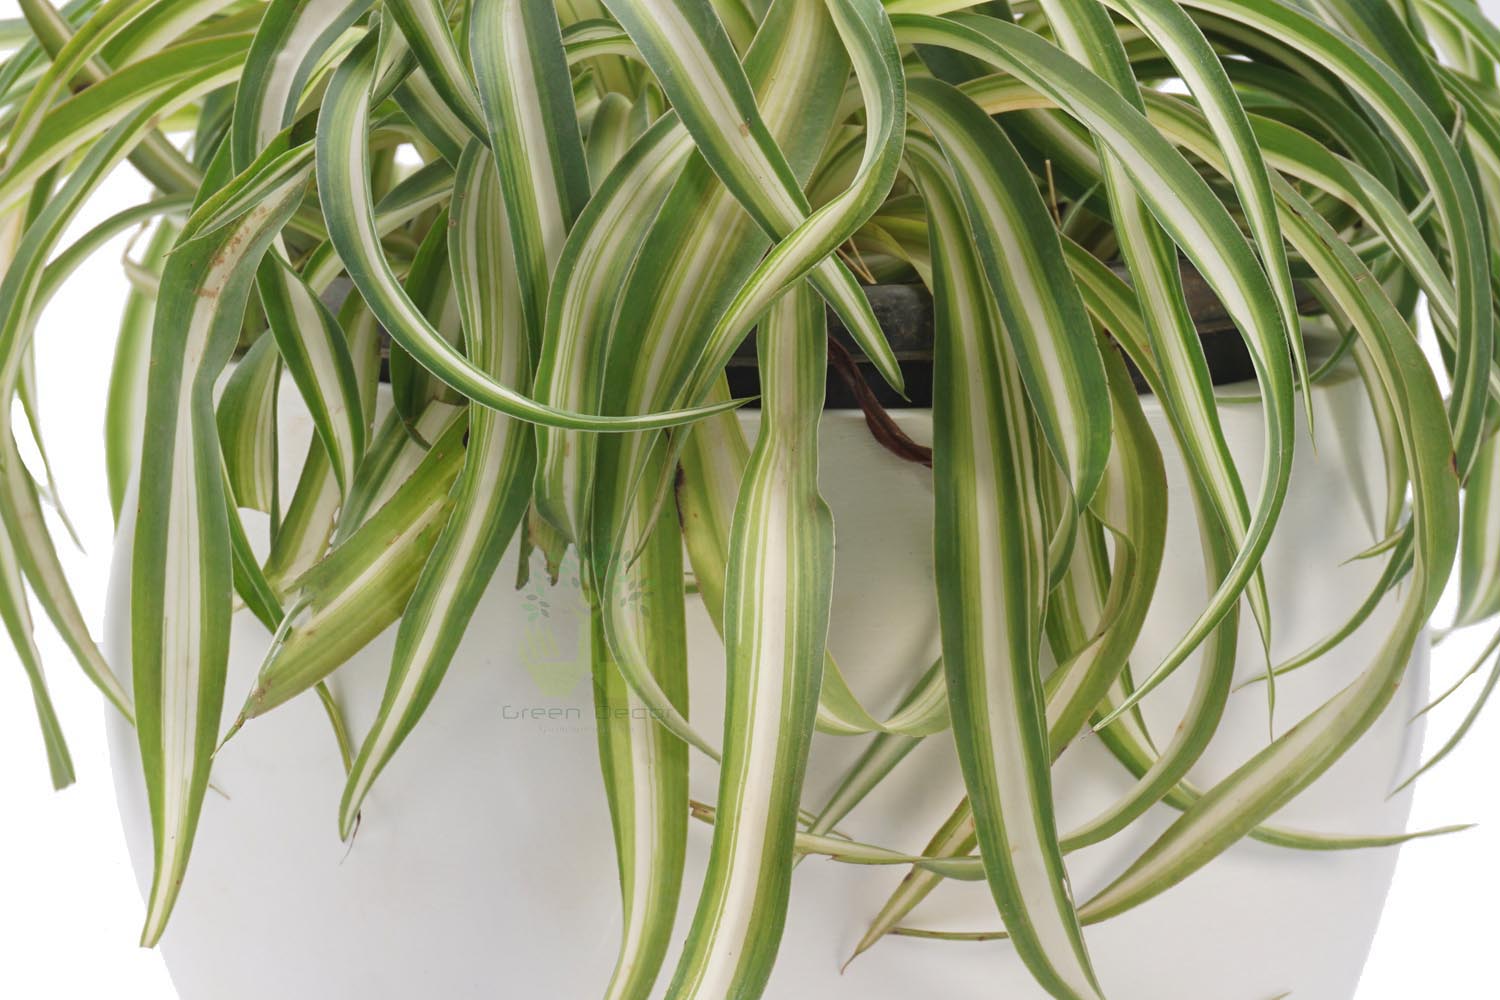 Buy Spider Plants , White Pots and seeds in Delhi NCR by the best online nursery shop Greendecor.